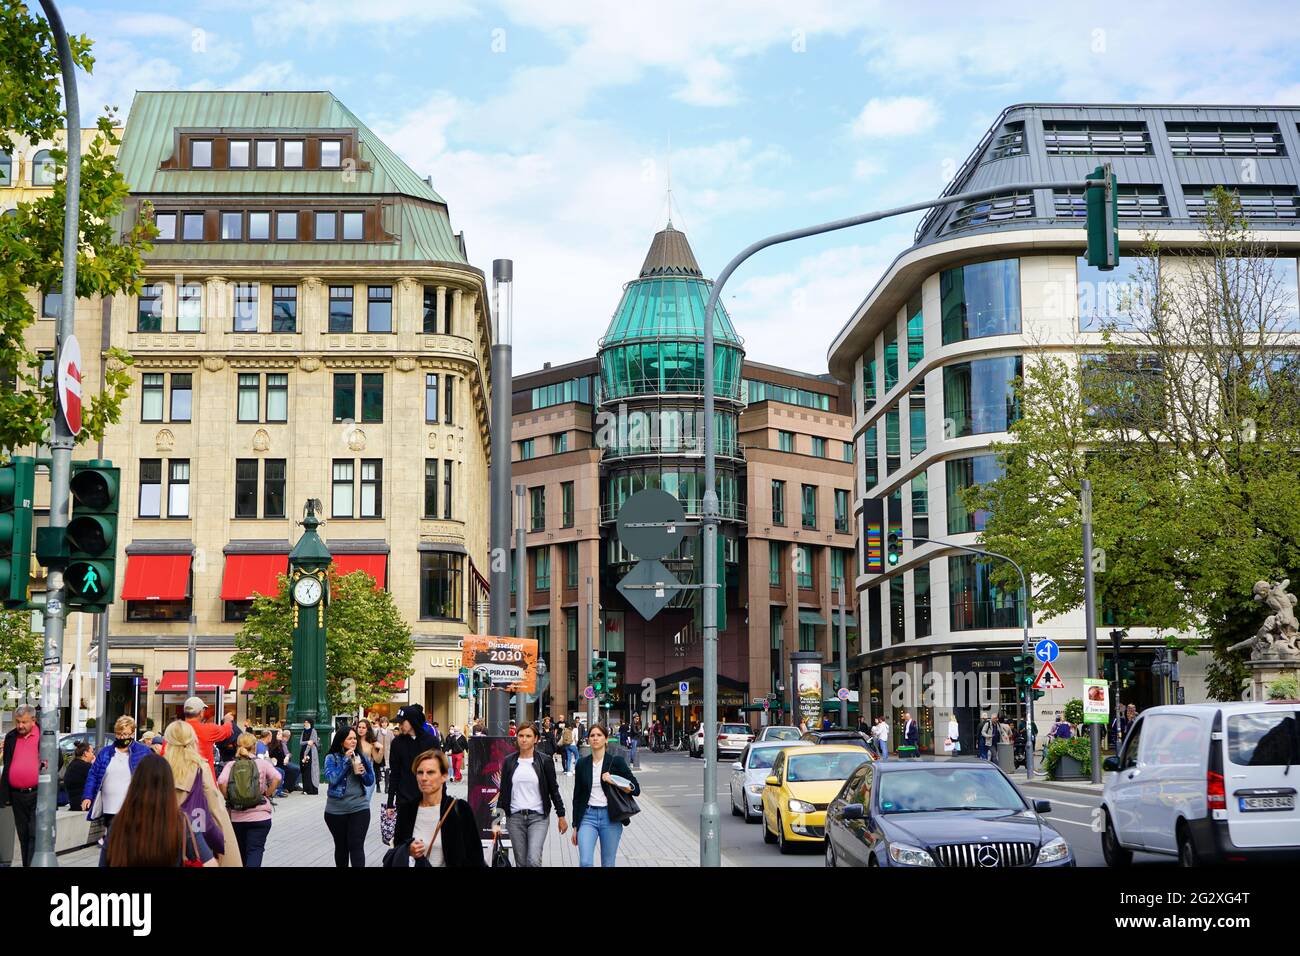 Shopping street in Düsseldorf city centre. The building with the green glass atrium is the shopping mall Schadow-Arkaden. Stock Photo